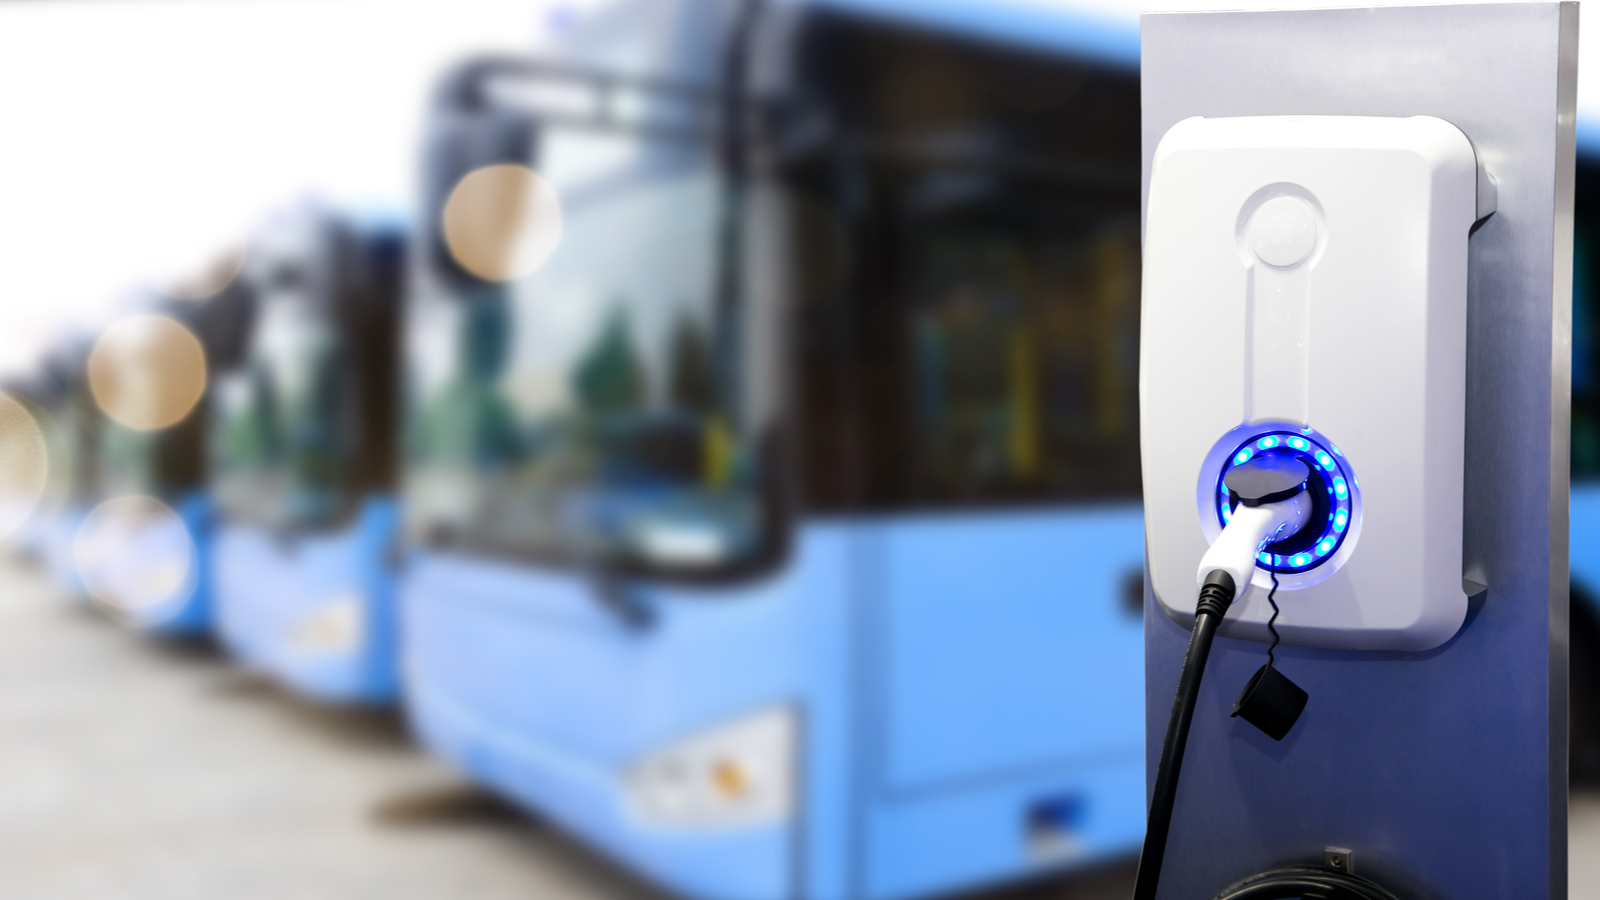 BLBD Stock. An electric vehicle charger is seen next to a row of blue electric buses. makes electric vans and buses.